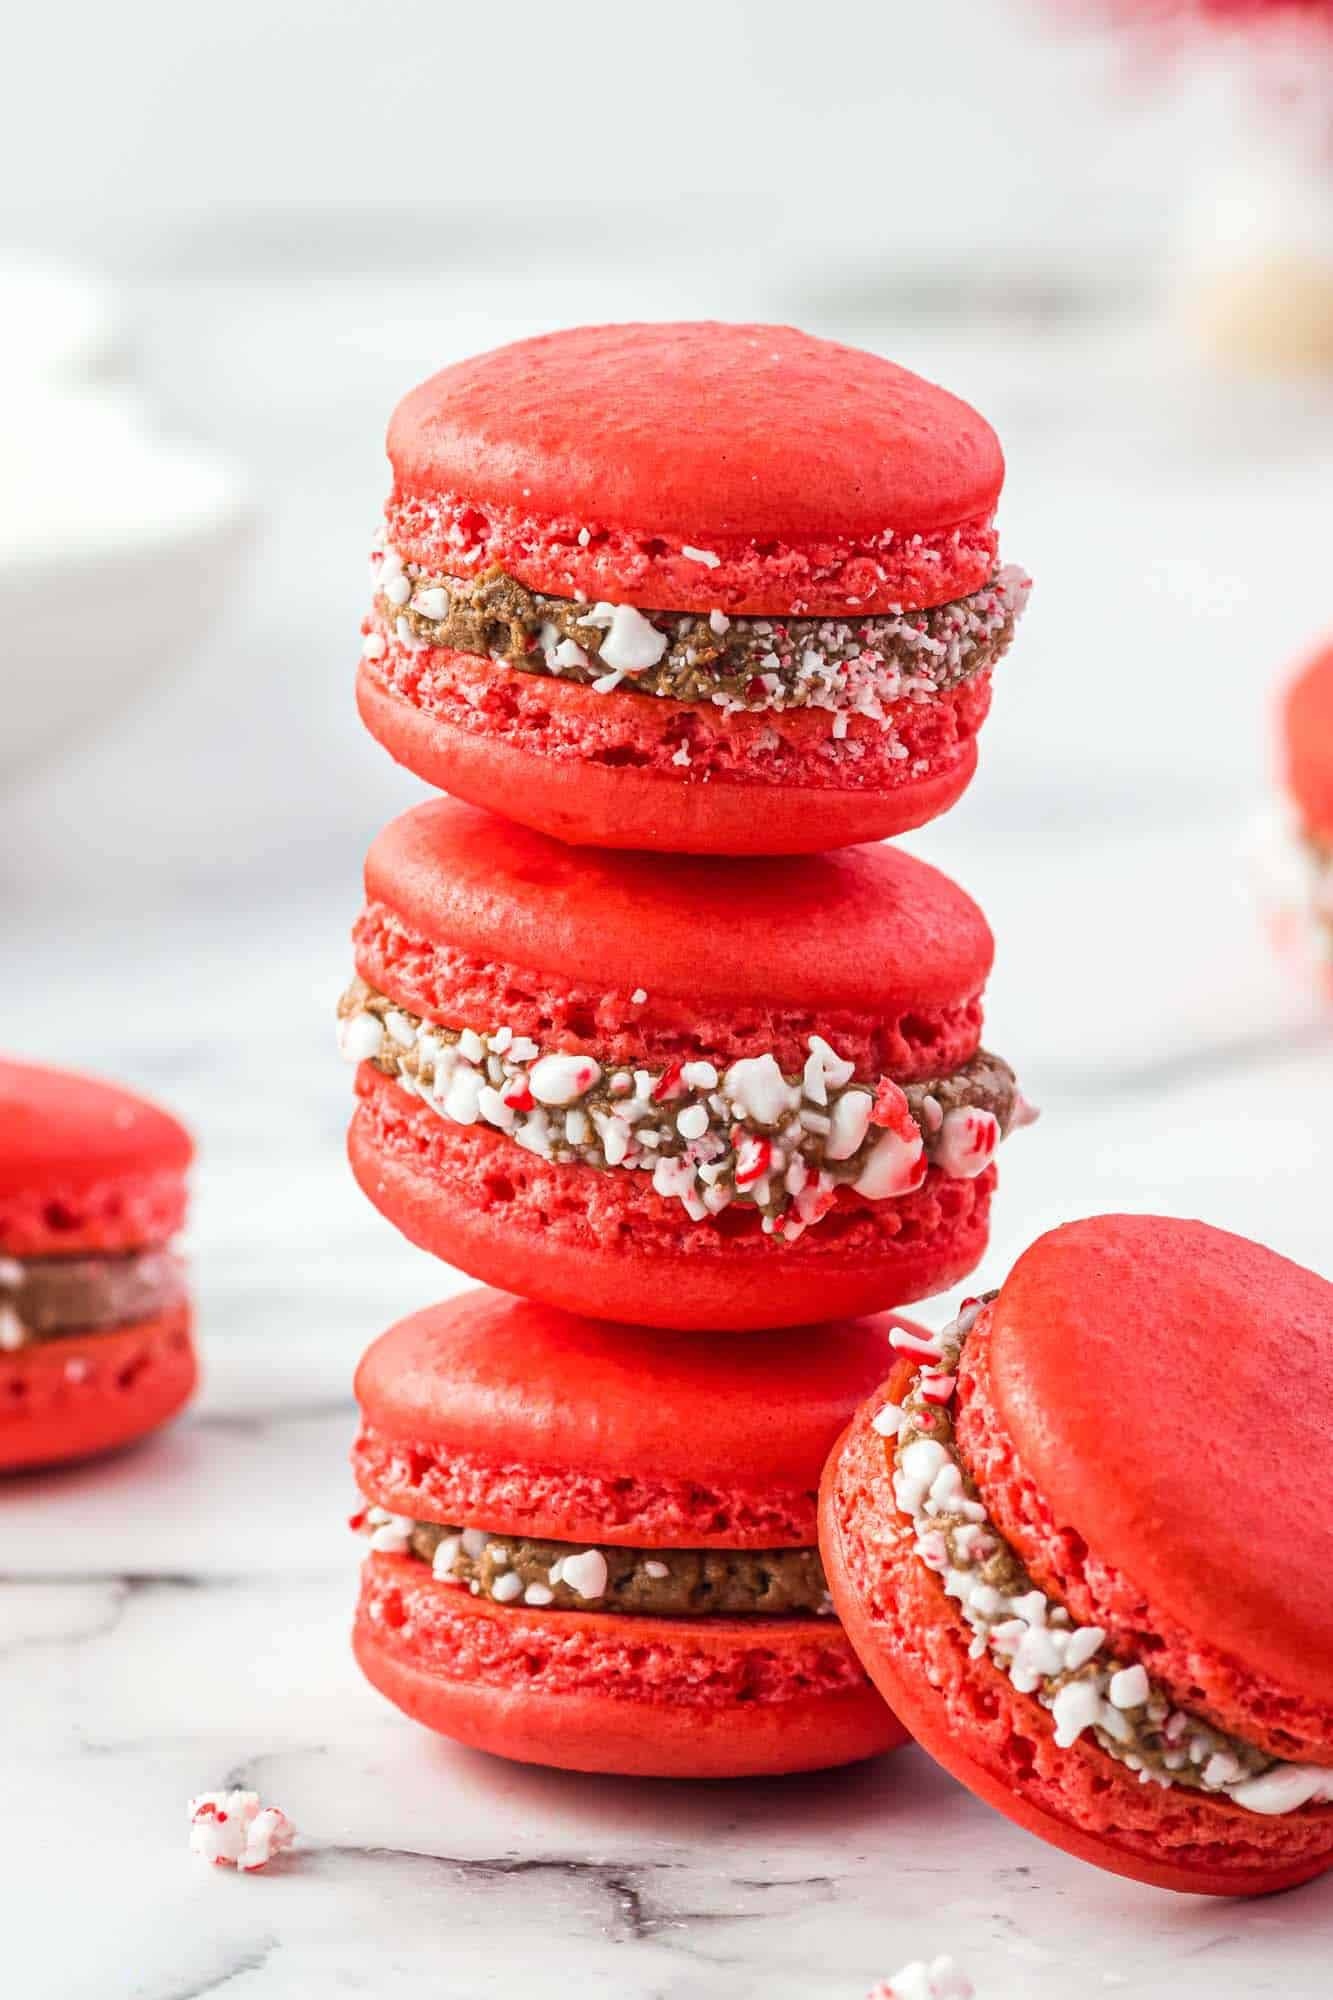 Macaron: Peppermint and chocolate flavoring, Snack. 1340x2000 HD Wallpaper.